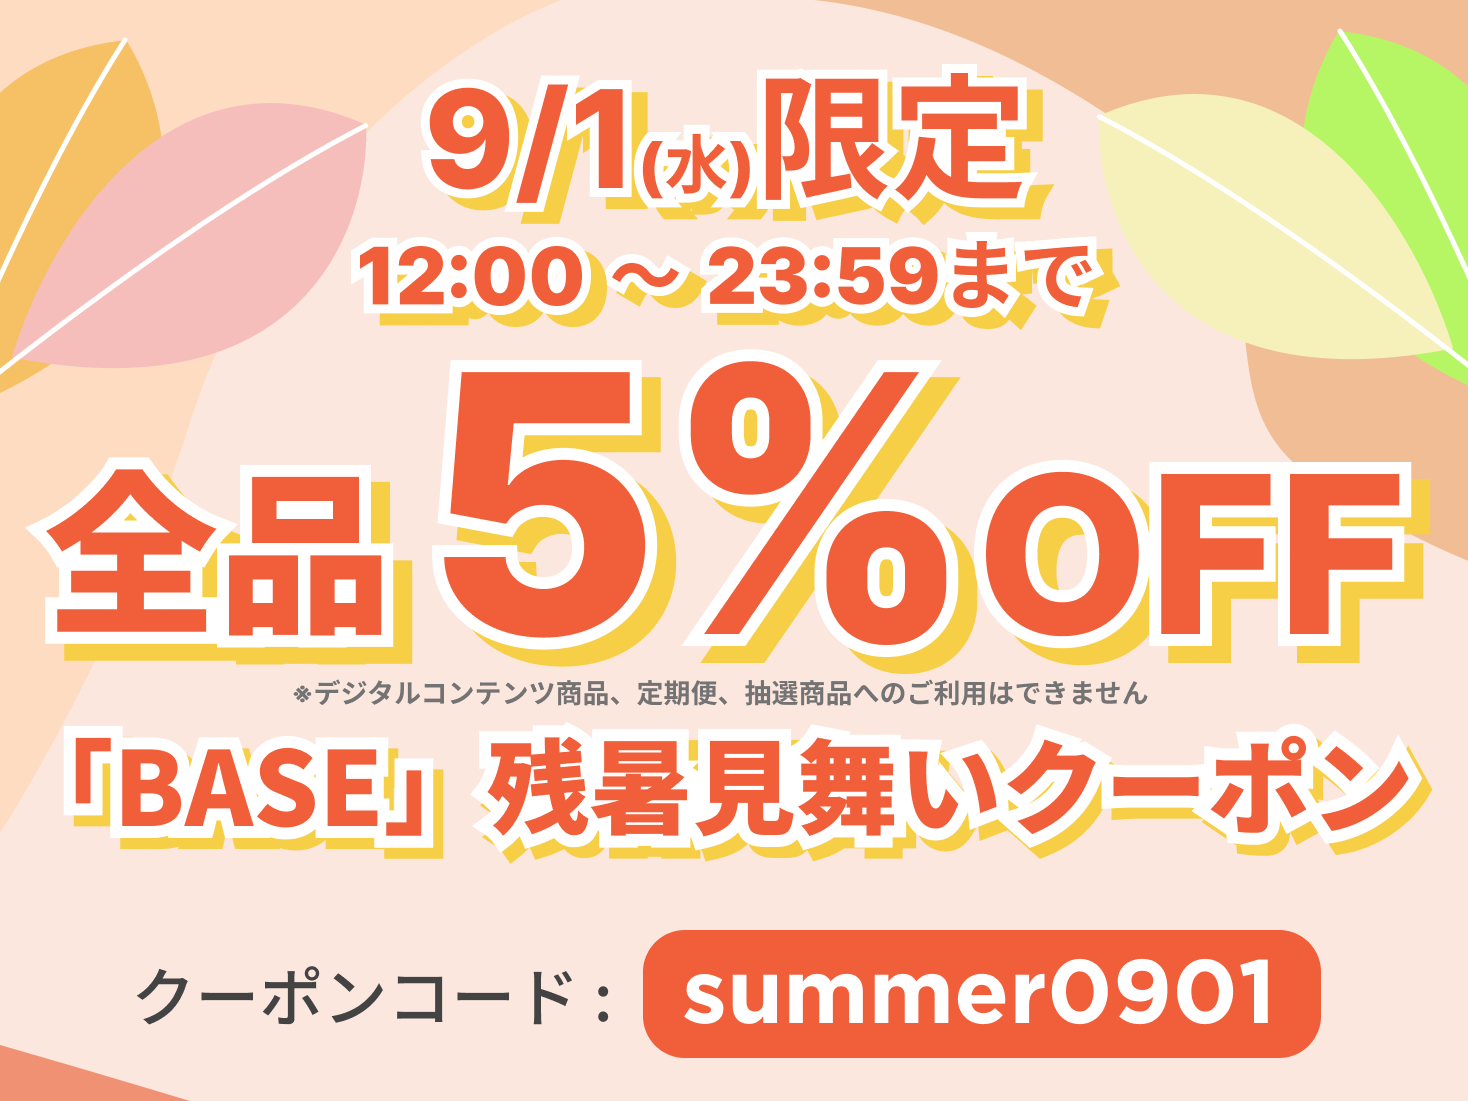 You are currently viewing 9月1日（水）12:00〜23:59の12時間限定で、お客様にご利用いただける5%OFFクーポンを配布